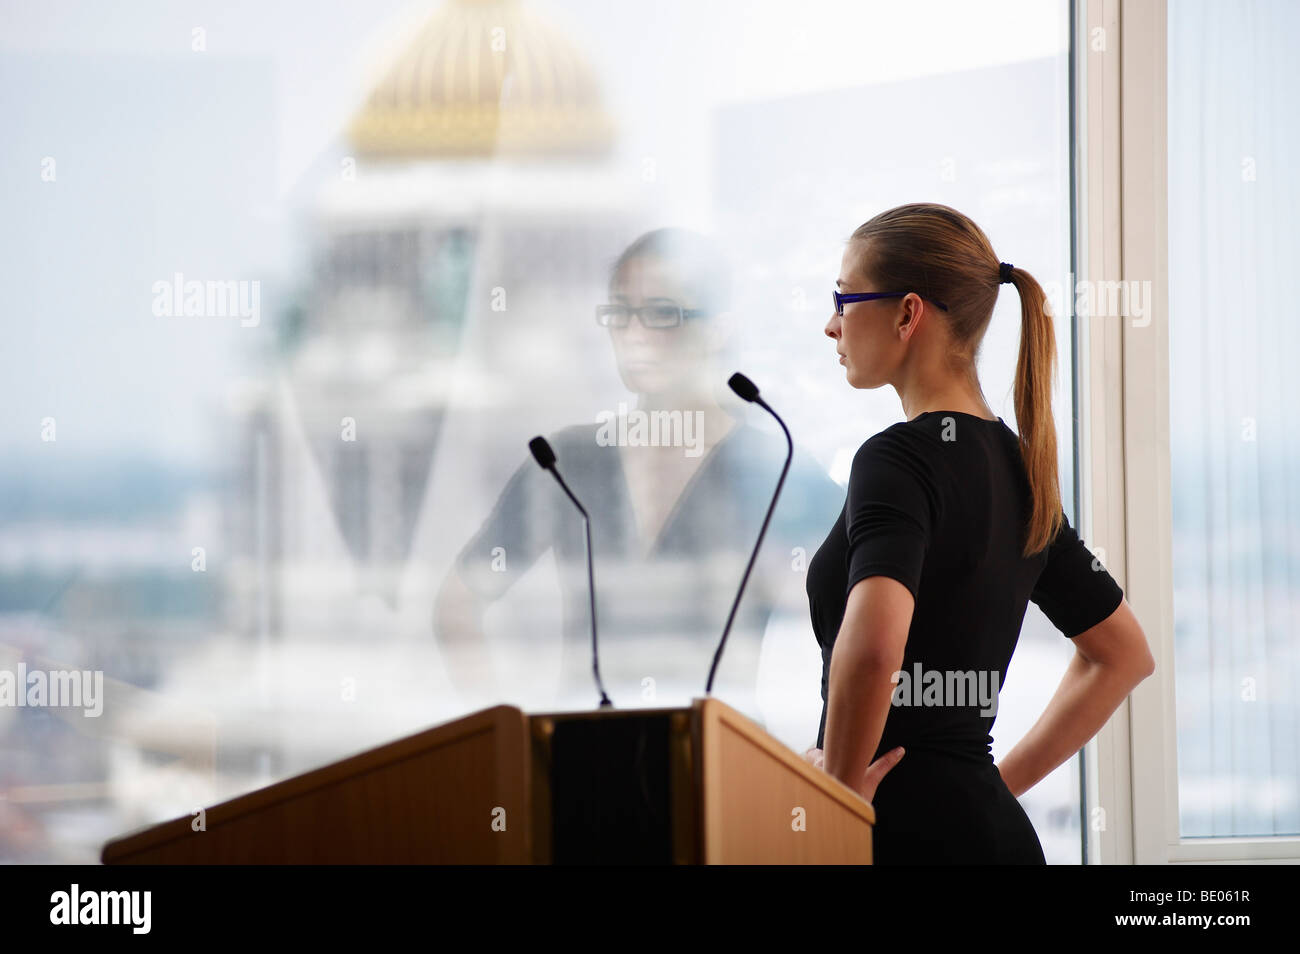 Woman in a conference room, with a view Stock Photo